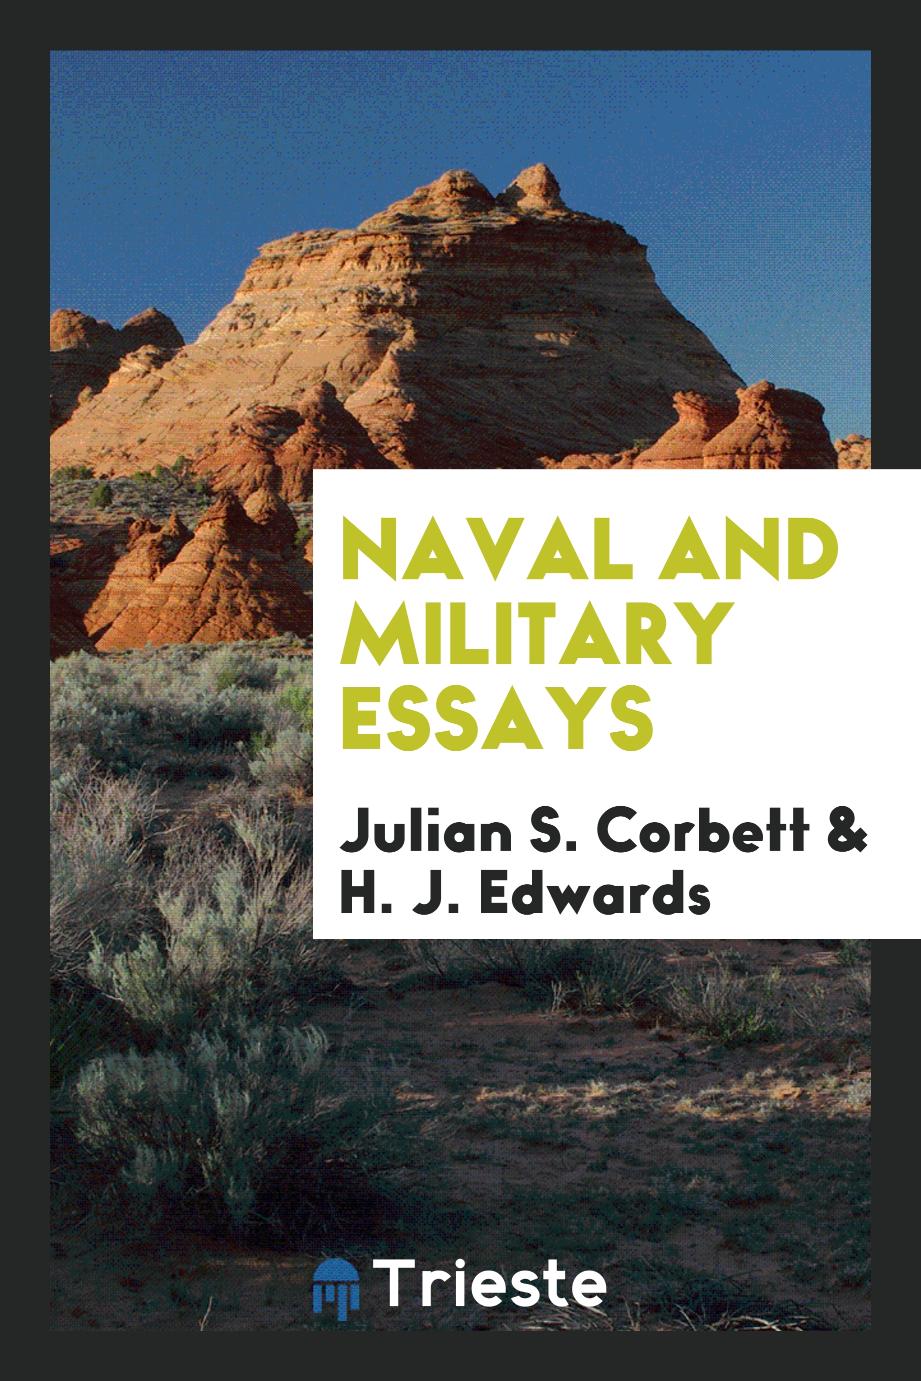 Naval and military essays